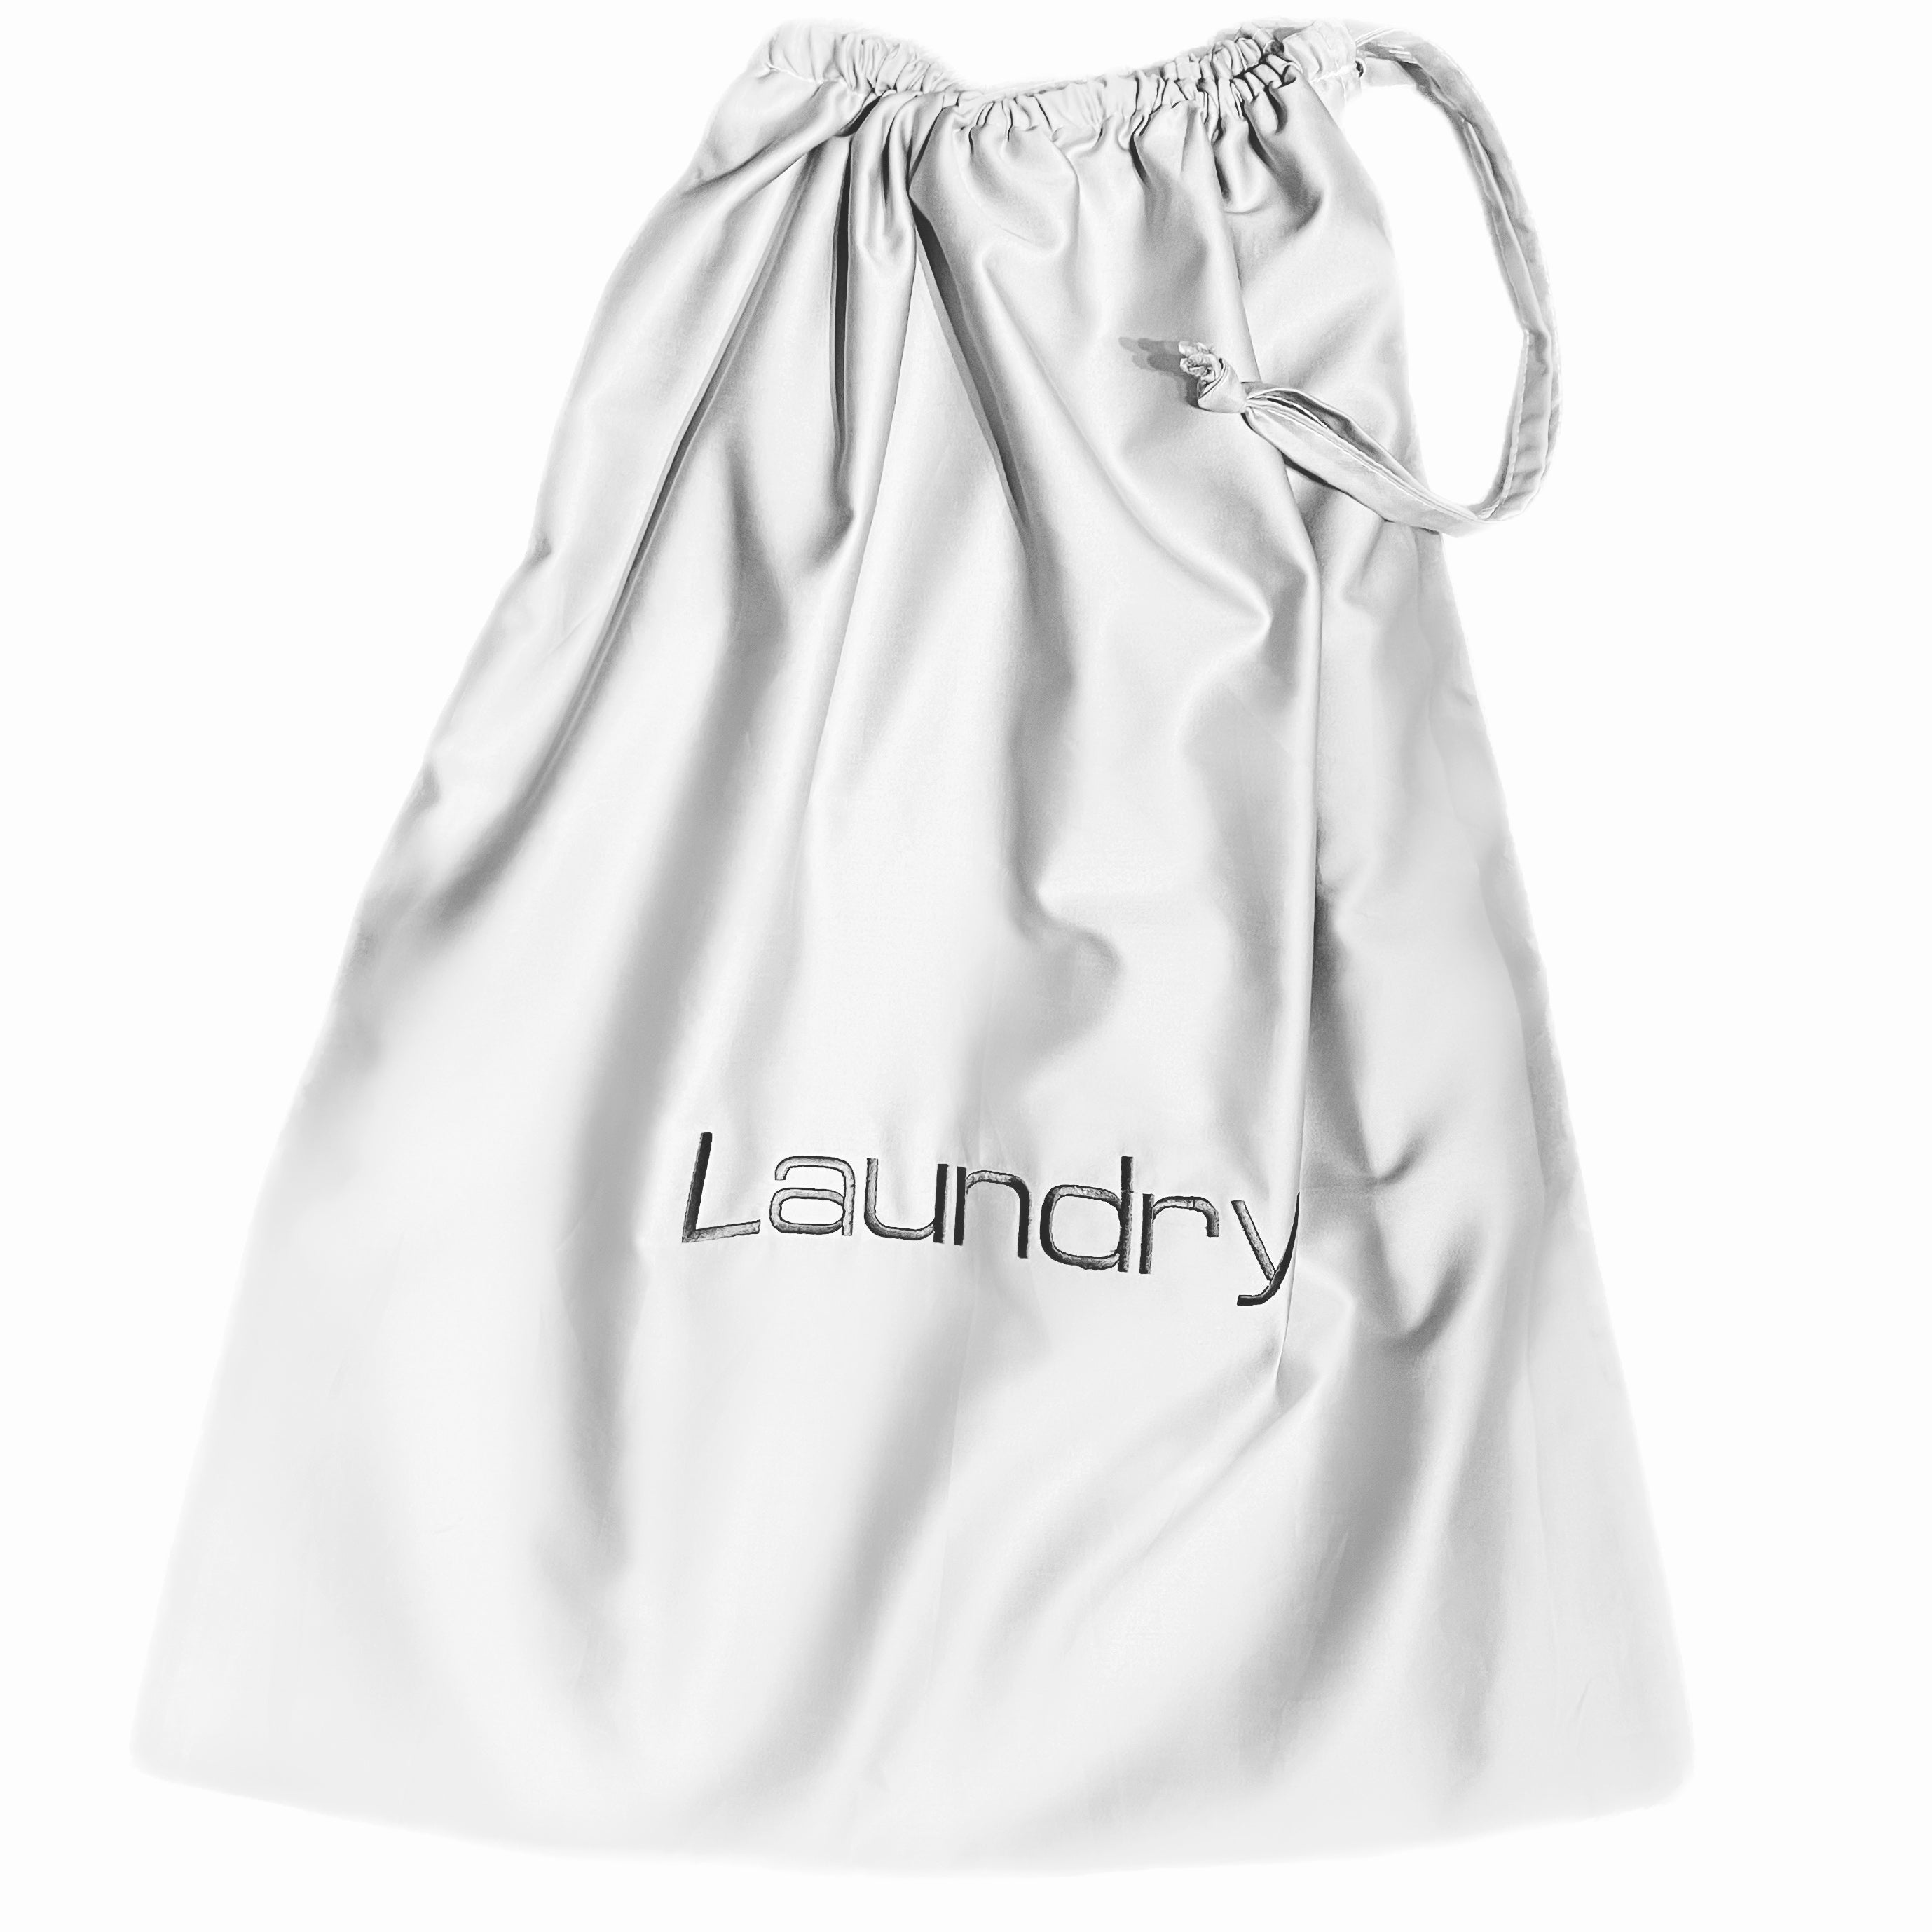 Embroidered Laundry Bags In Cotton Sateen